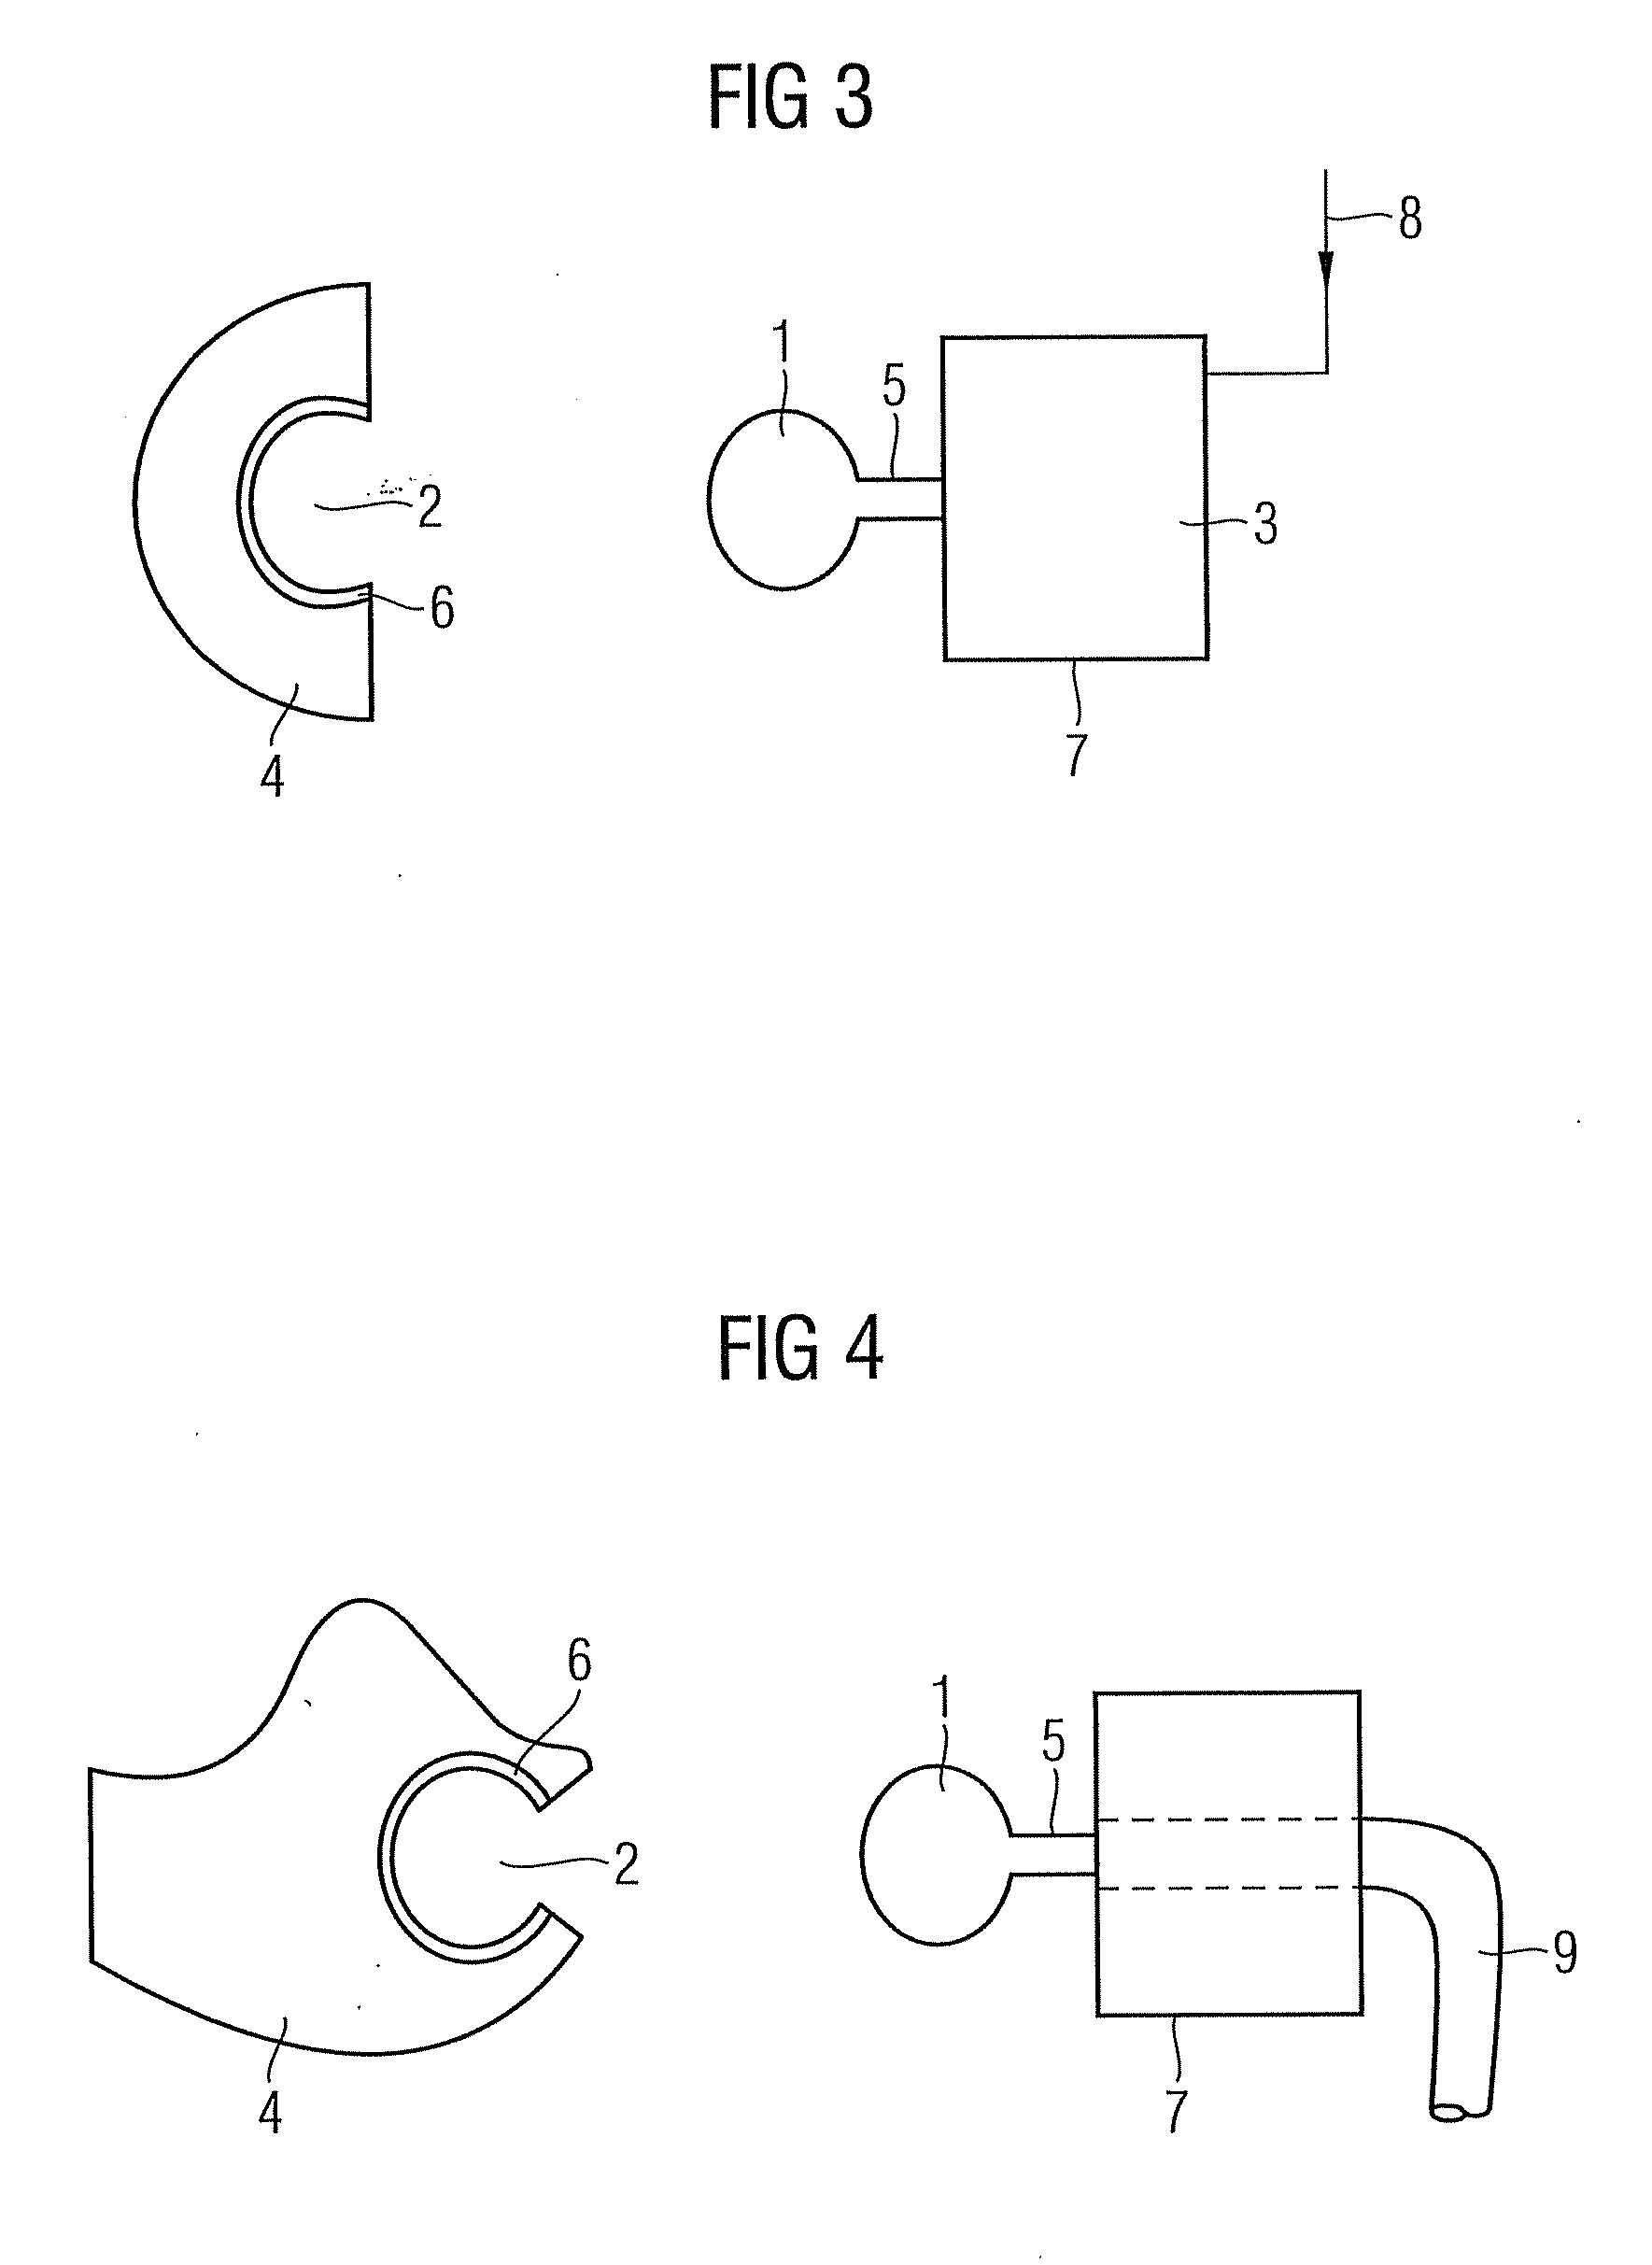 Ear mold for a hearing device